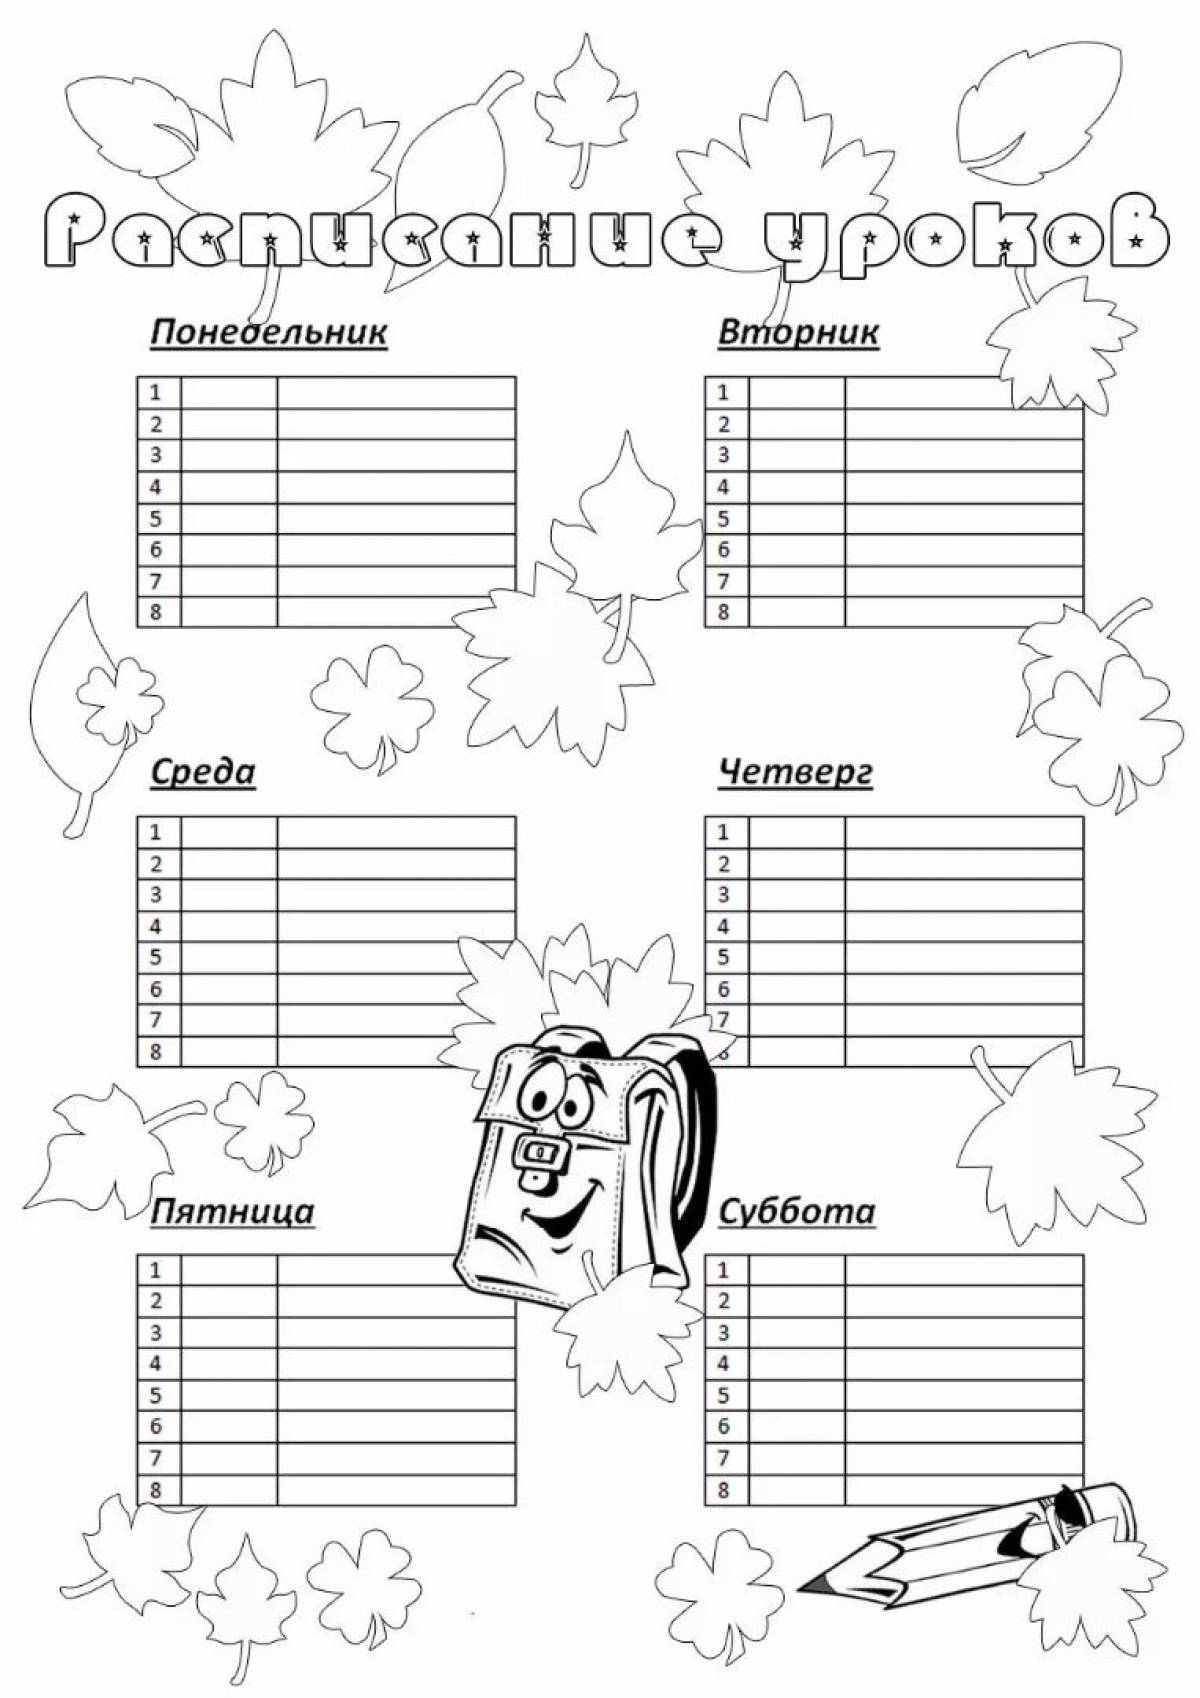 Colorful and innovative boys timetable coloring page